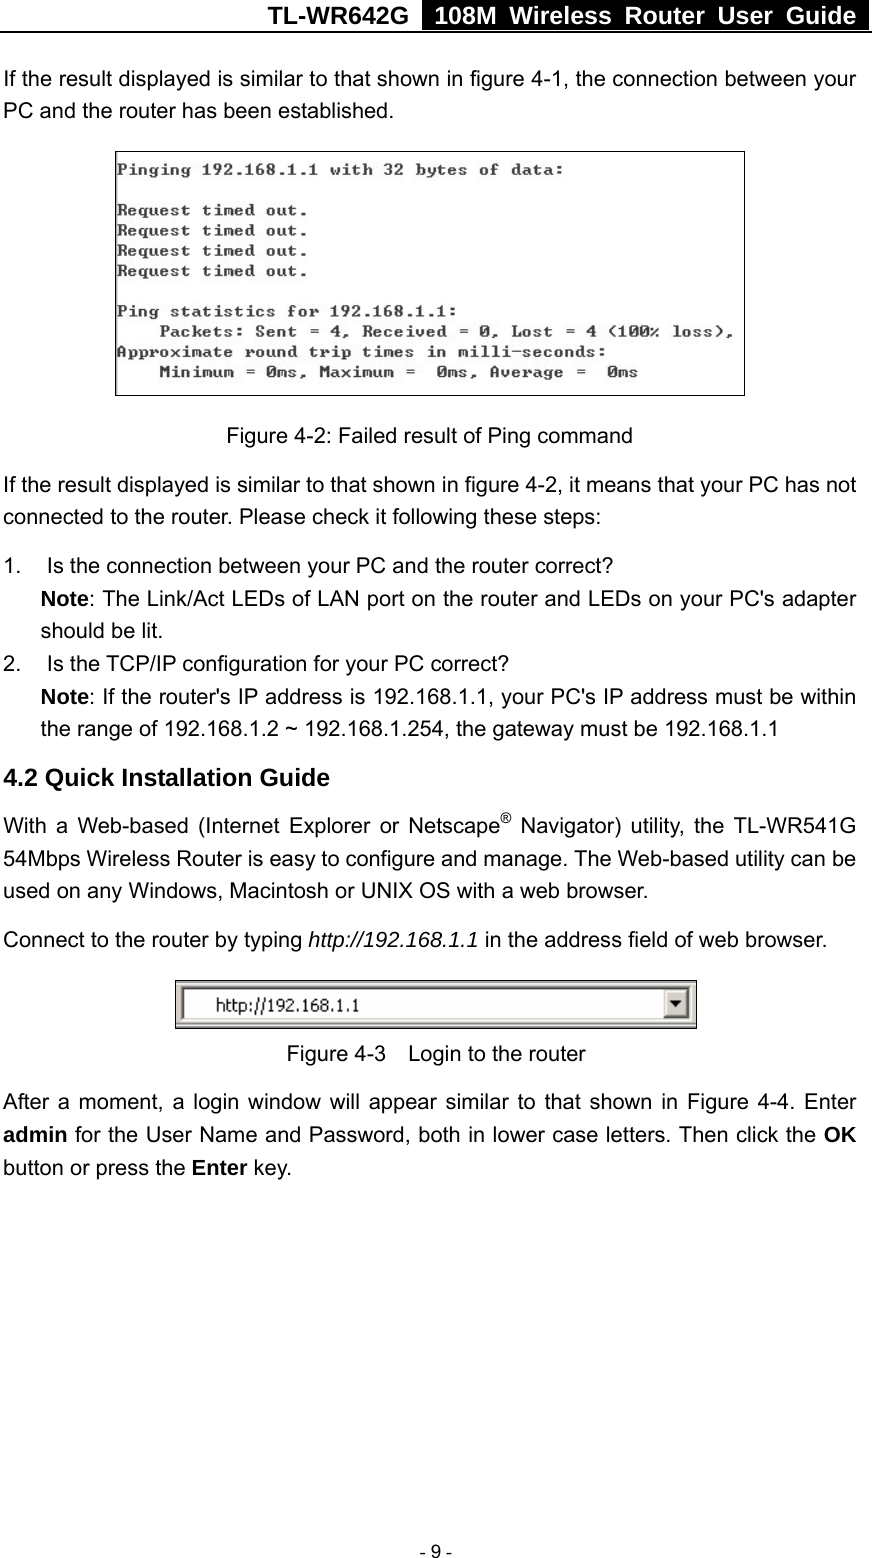 TL-WR642G   108M Wireless Router User Guide   - 9 - If the result displayed is similar to that shown in figure 4-1, the connection between your PC and the router has been established.    Figure 4-2: Failed result of Ping command If the result displayed is similar to that shown in figure 4-2, it means that your PC has not connected to the router. Please check it following these steps: 1.  Is the connection between your PC and the router correct? Note: The Link/Act LEDs of LAN port on the router and LEDs on your PC&apos;s adapter should be lit. 2. Is the TCP/IP configuration for your PC correct? Note: If the router&apos;s IP address is 192.168.1.1, your PC&apos;s IP address must be within the range of 192.168.1.2 ~ 192.168.1.254, the gateway must be 192.168.1.1 4.2 Quick Installation Guide With a Web-based (Internet Explorer or Netscape® Navigator) utility, the TL-WR541G 54Mbps Wireless Router is easy to configure and manage. The Web-based utility can be used on any Windows, Macintosh or UNIX OS with a web browser. Connect to the router by typing http://192.168.1.1 in the address field of web browser.  Figure 4-3    Login to the router After a moment, a login window will appear similar to that shown in Figure 4-4. Enter admin for the User Name and Password, both in lower case letters. Then click the OK button or press the Enter key. 